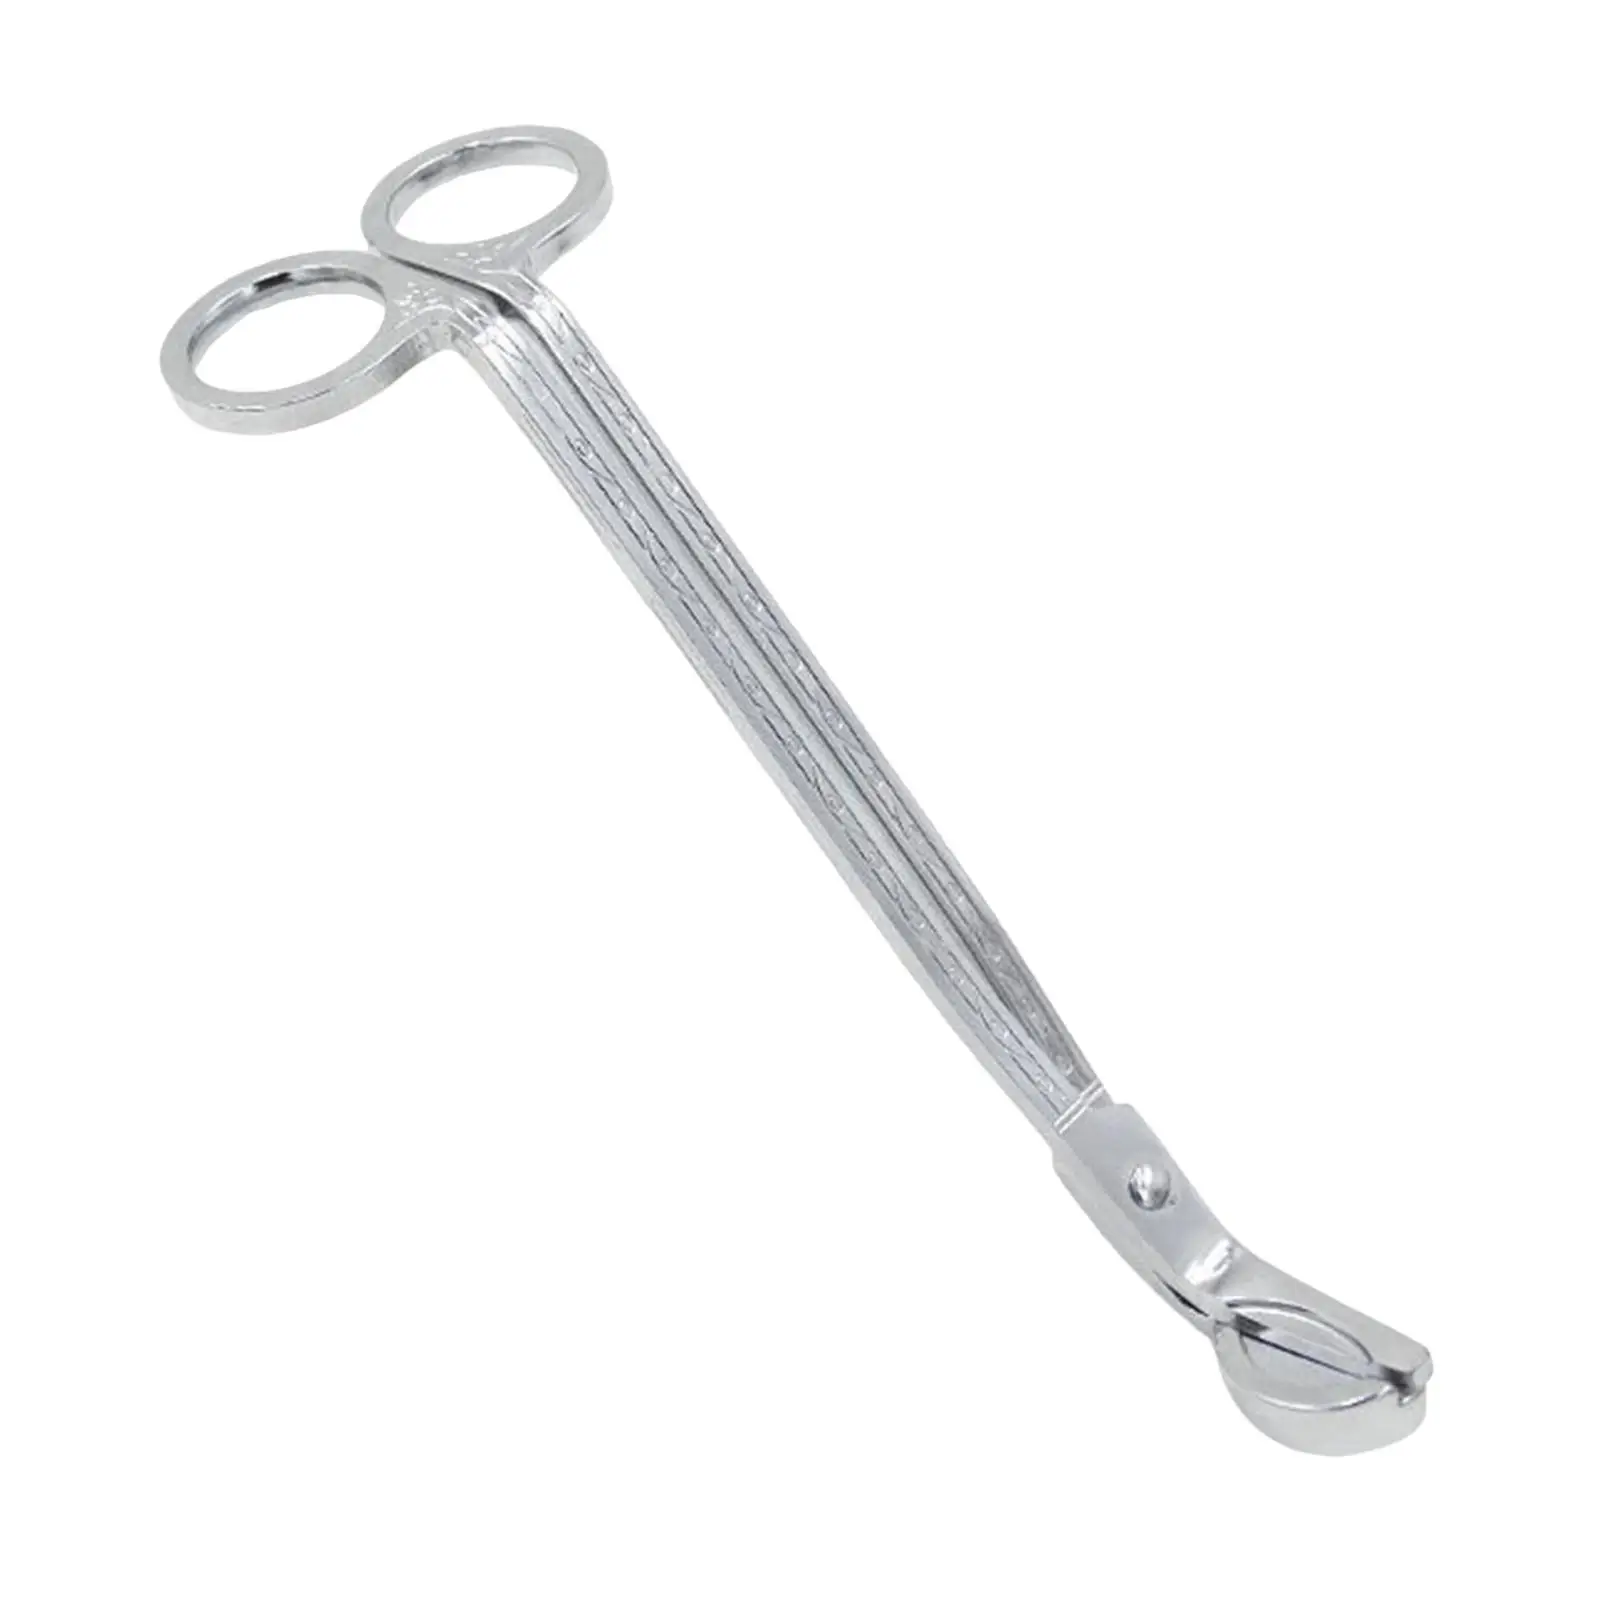 Stainless Steel Wick Clipping Polished Wick Cut Catcher Candles Tool Wick Remove Candles Wick Clipping